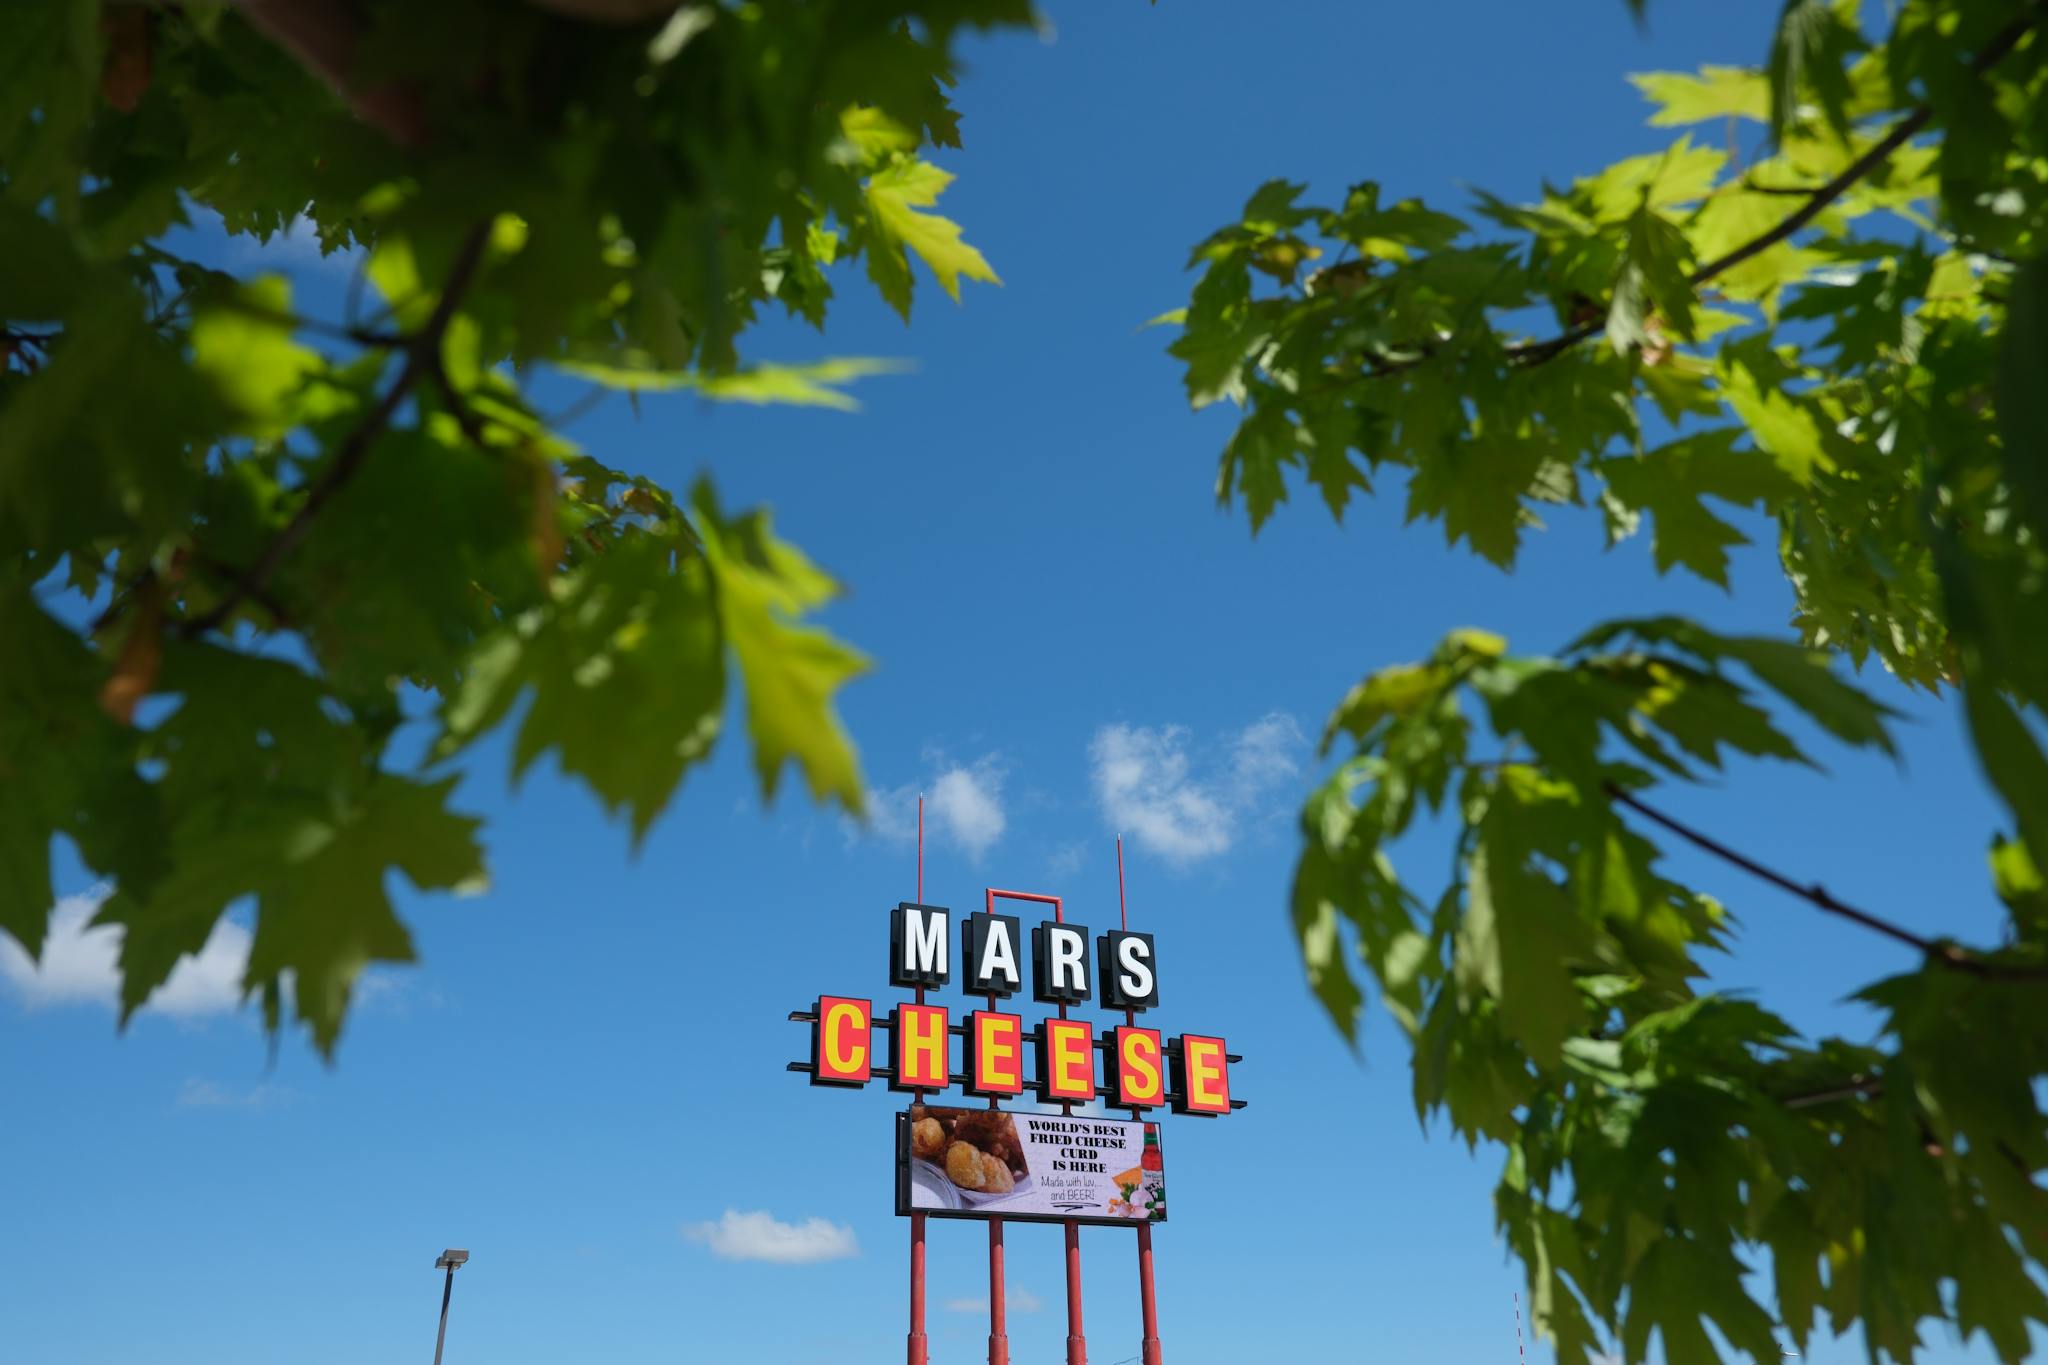 A vibrant blue sky is the backdrop for a tall sign that reads Mars Cheese, framed by green tree leaves in the foreground